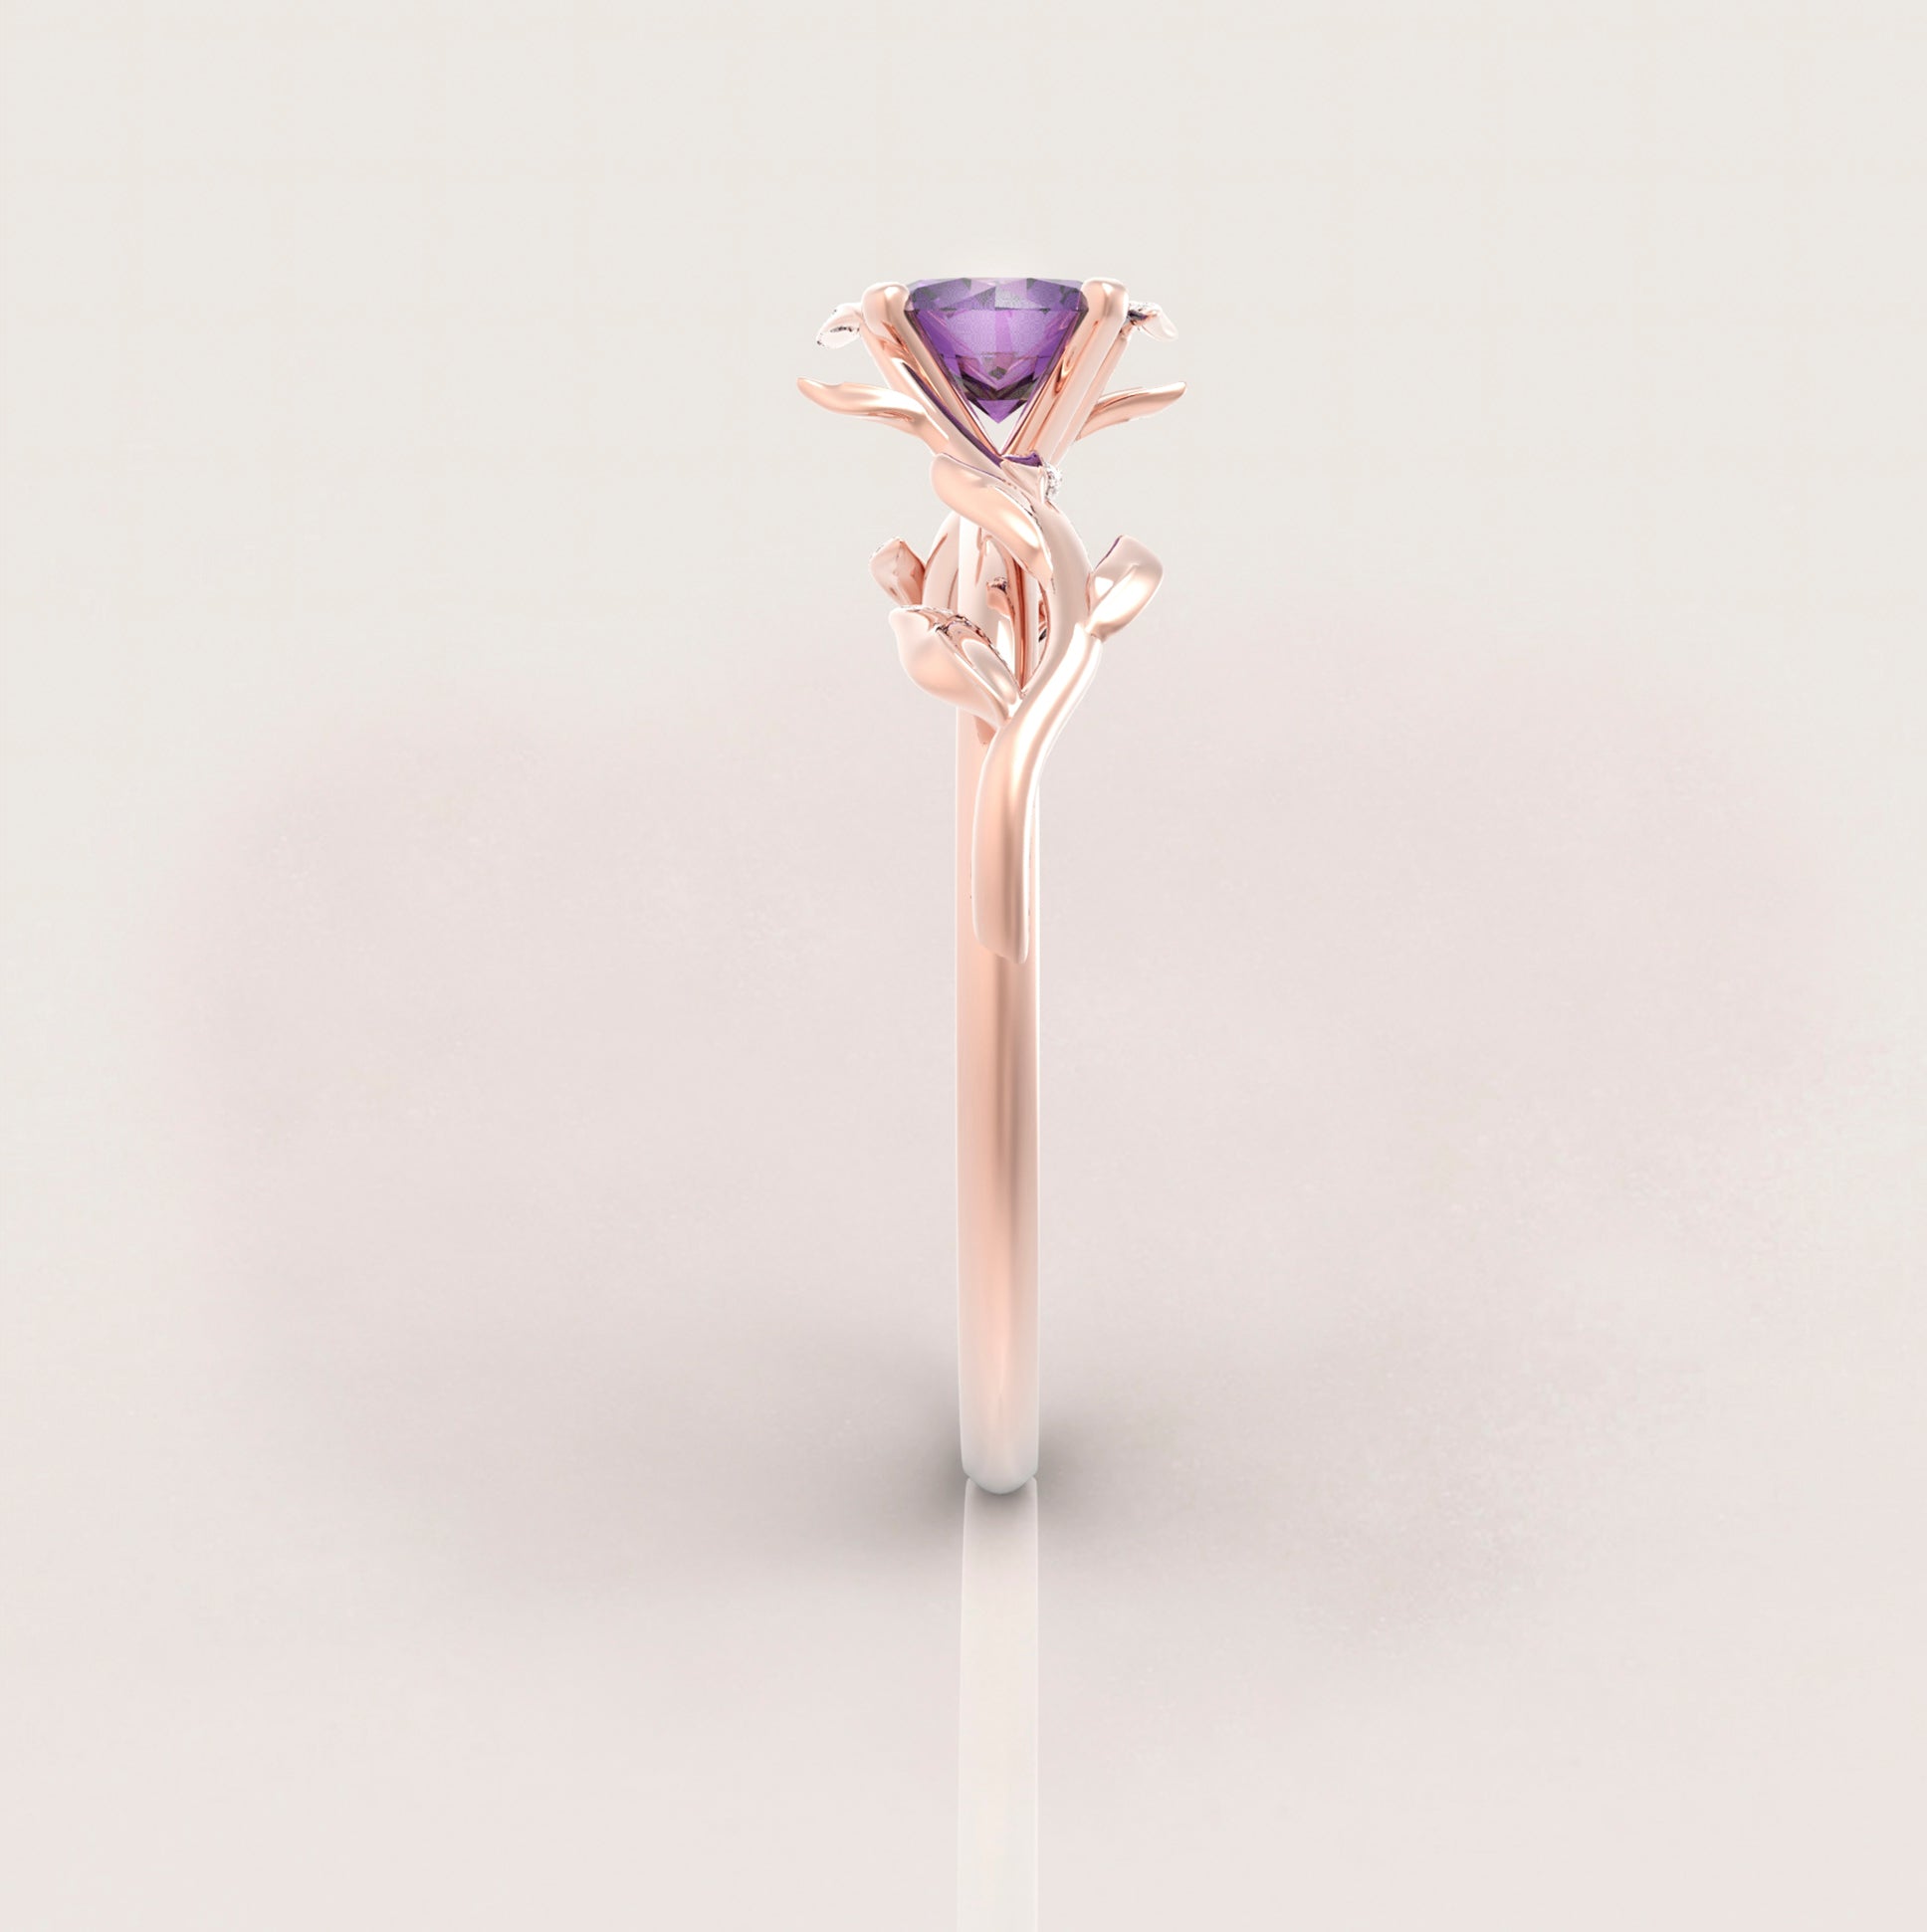 Unique Leaves Engagement Ring No.5 in Rose Gold - Amethyst - Roelavi